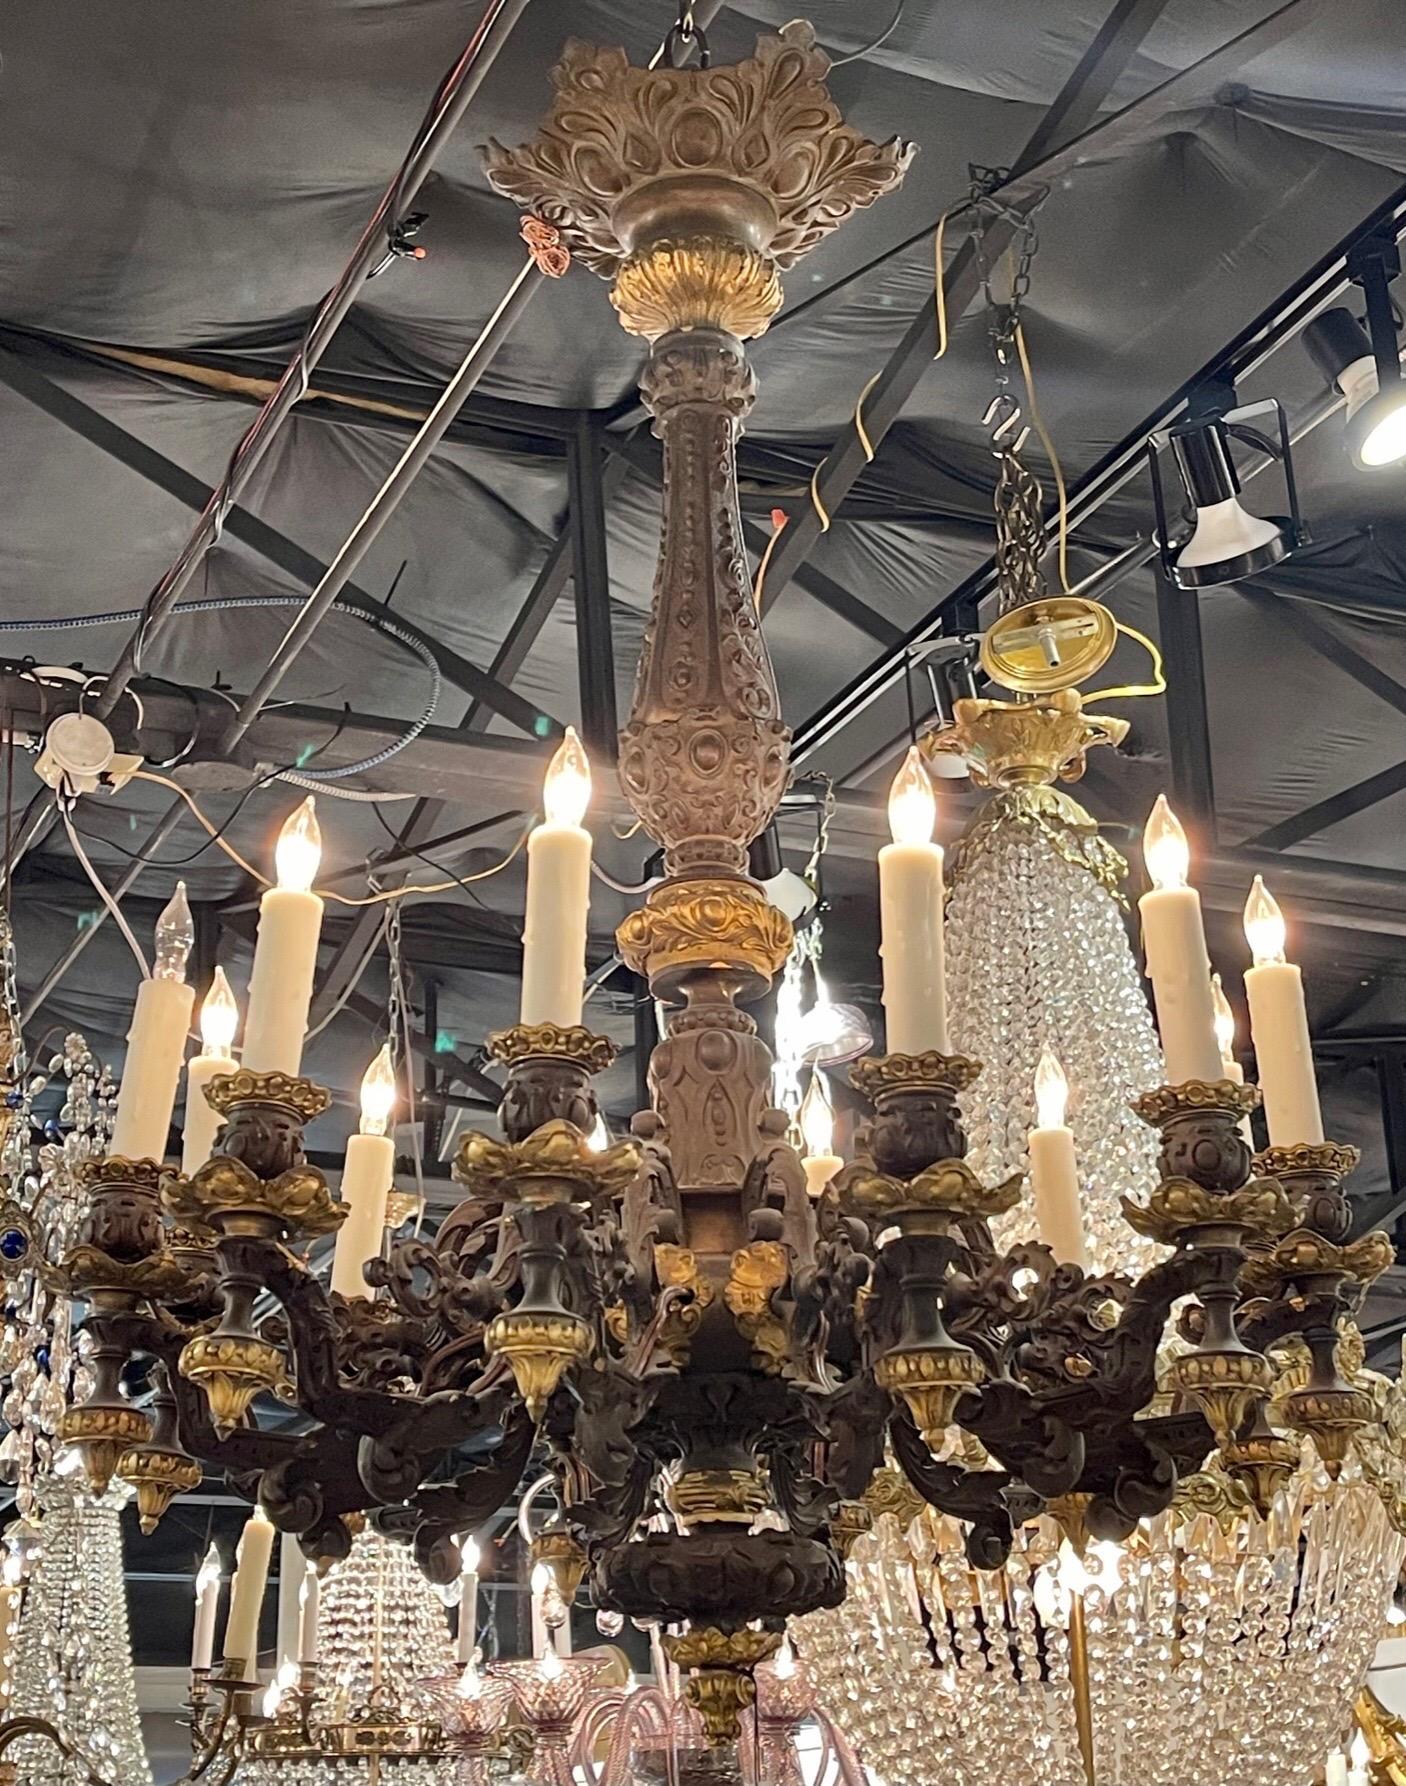 Handsome 19th century French bronze 12 light chandelier in gold and black. Nice decorative details and very fine quality! Super elegant!